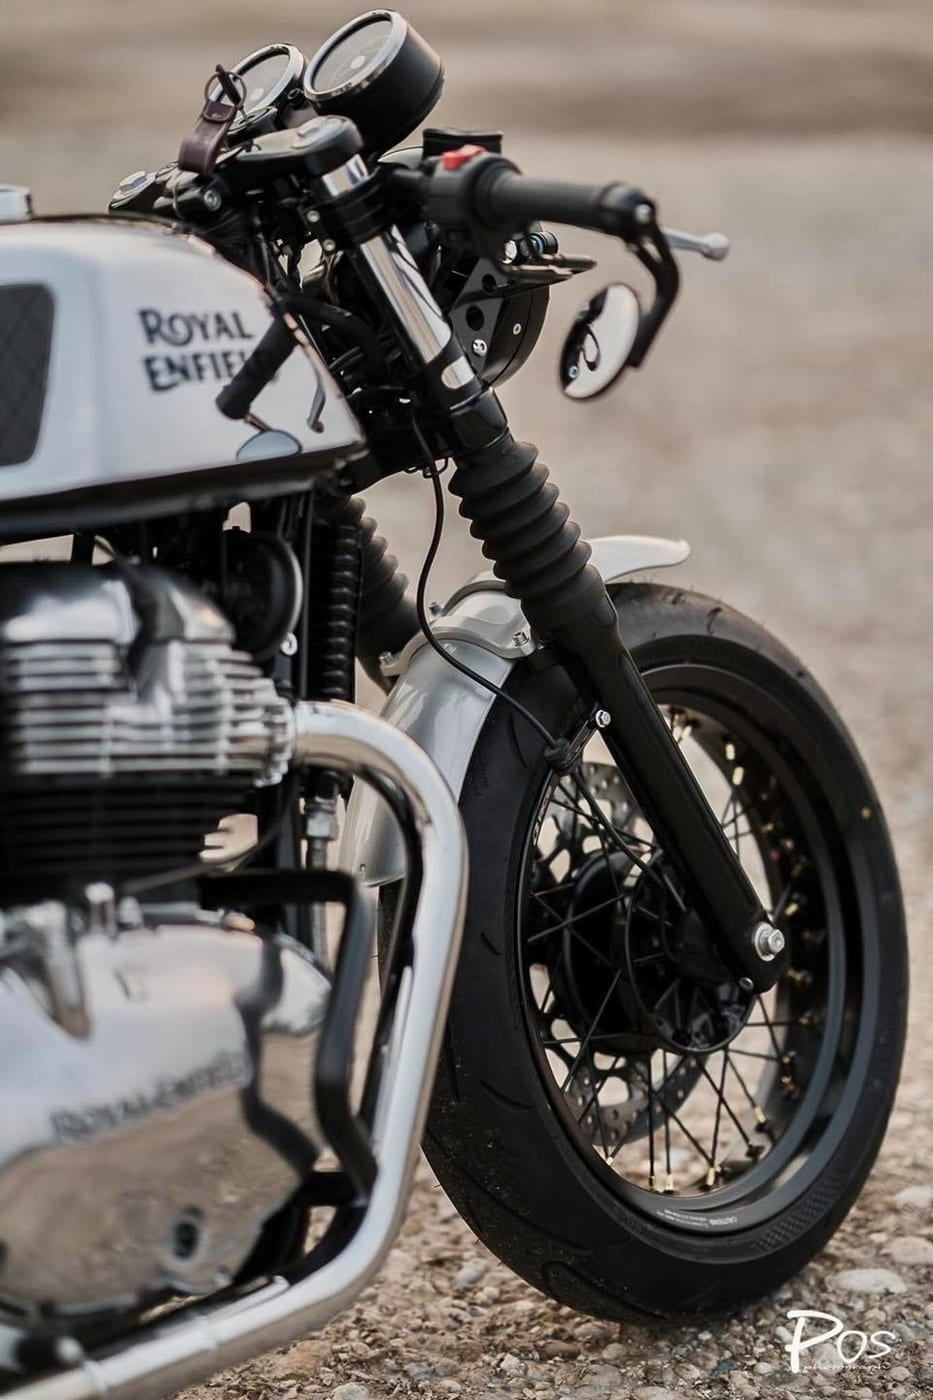 Check Out This Lovely Modified Royal Enfield GT650 From Thailand